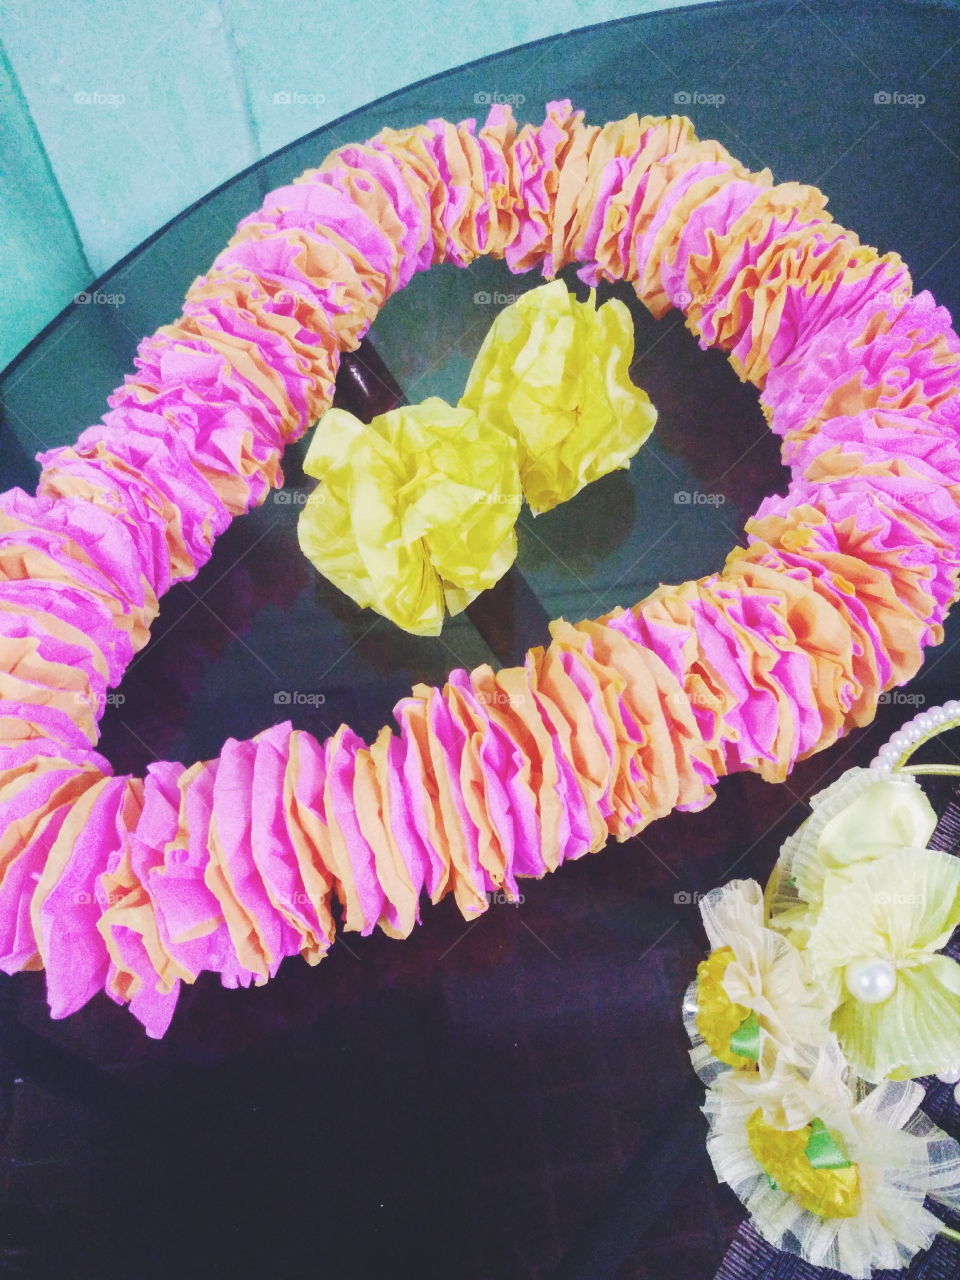 My mom made a Hawaiian Lei and I just wanted to share it 🌸